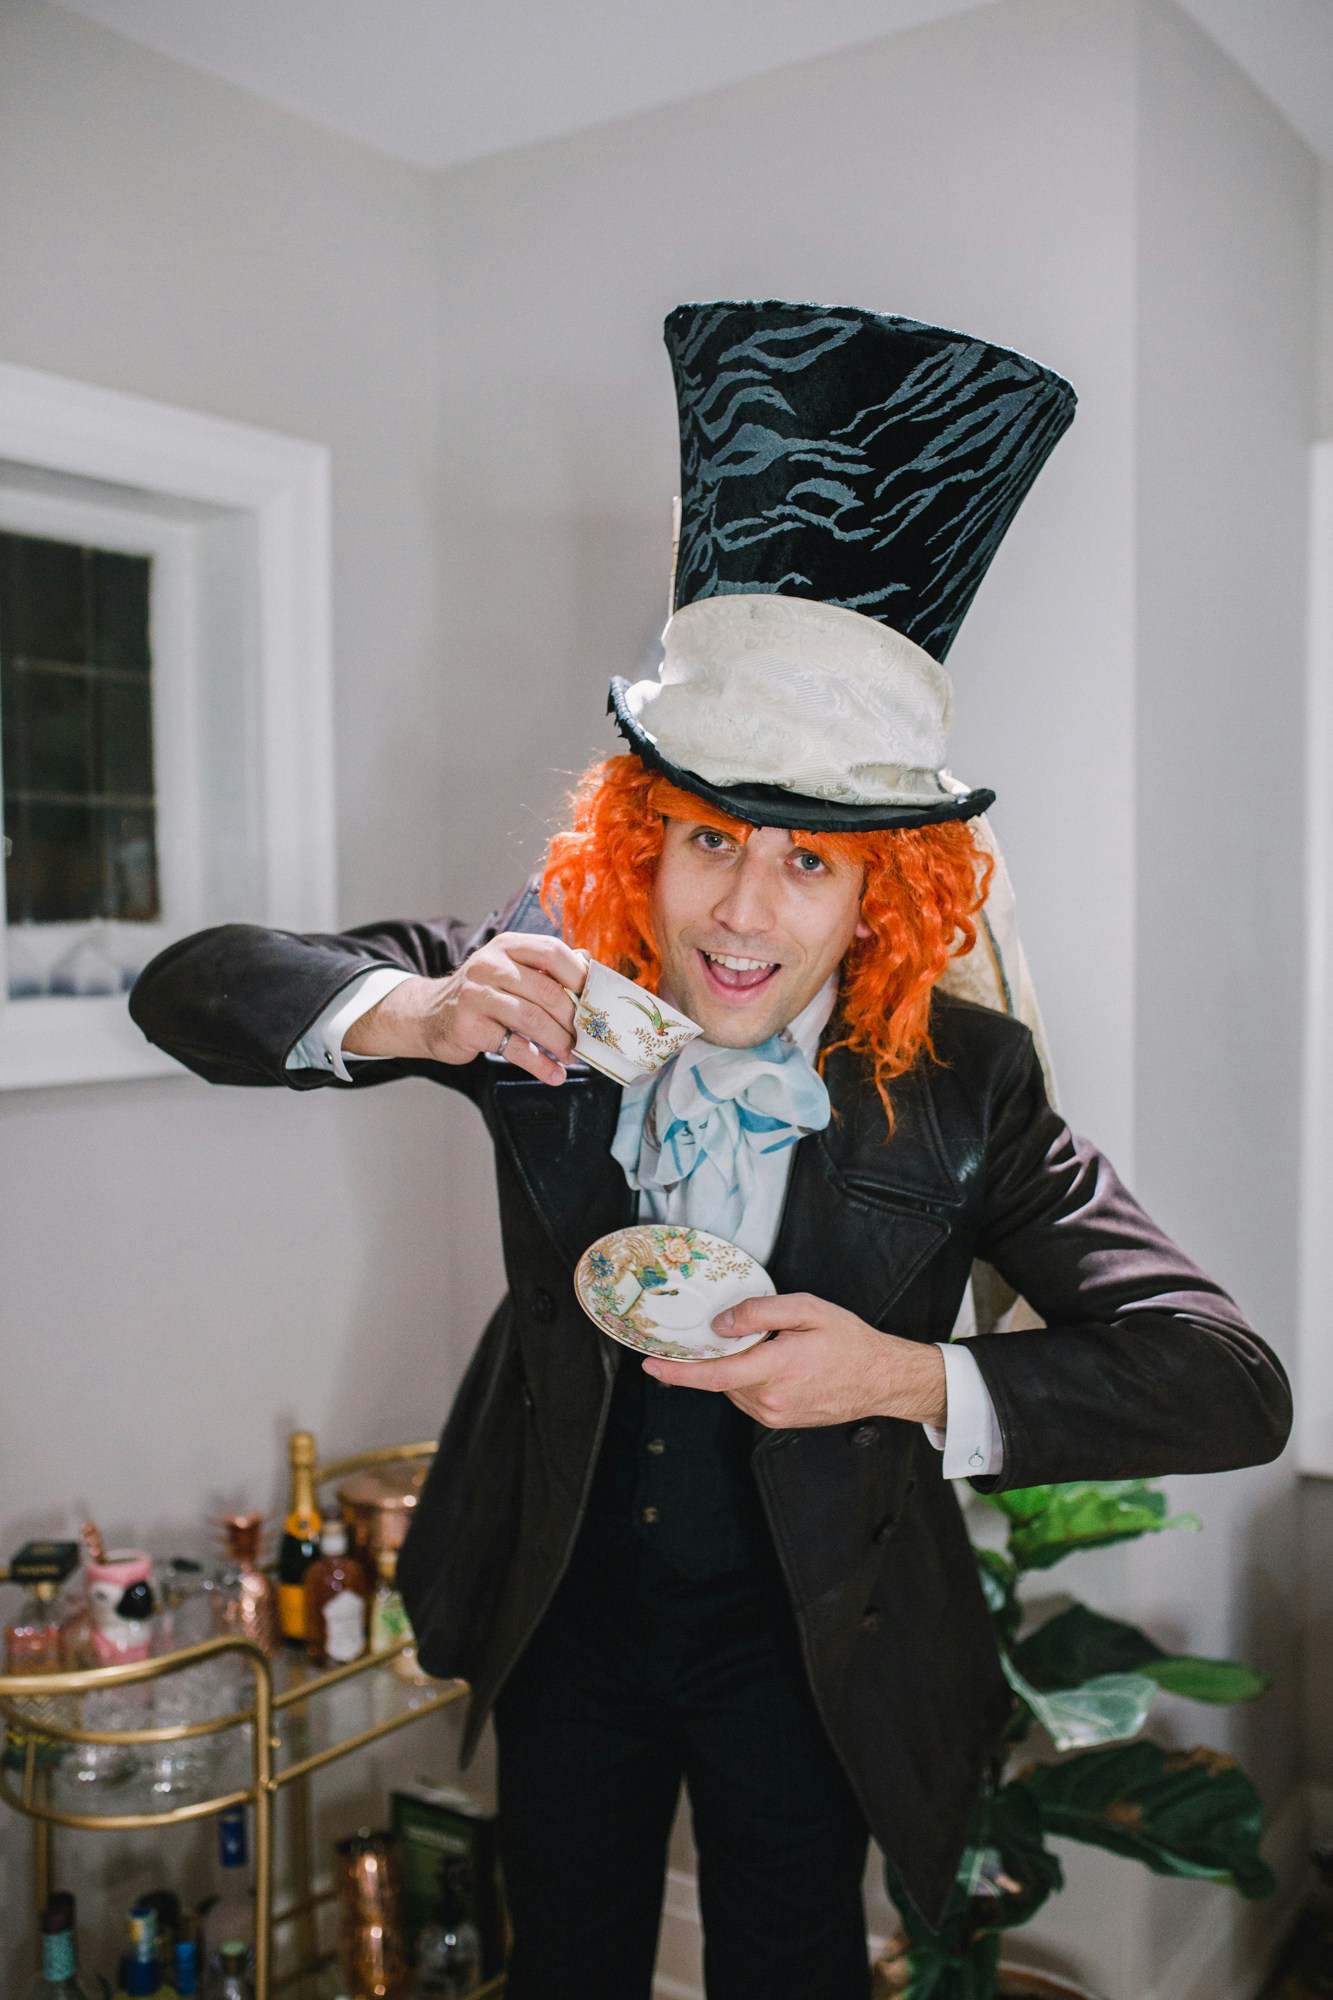 DIY Mad Hatter Alice in Wonderland Costume idea: a guide on how to make a realistic Mad Hatter hat and costume